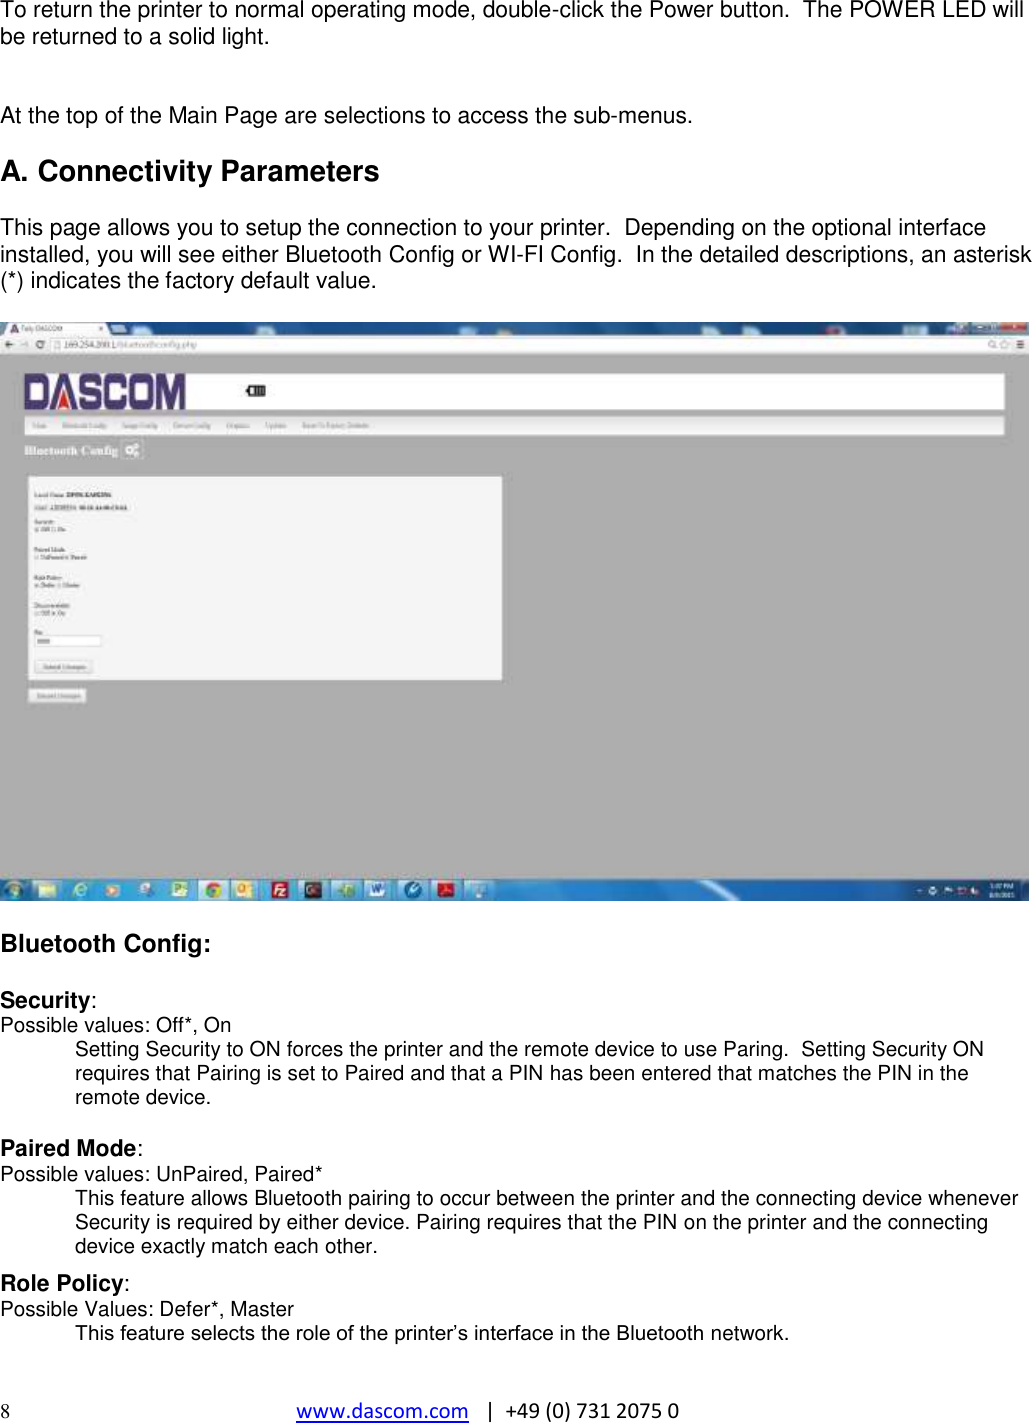  8  www.dascom.com   |  +49 (0) 731 2075 0  To return the printer to normal operating mode, double-click the Power button.  The POWER LED will be returned to a solid light.   At the top of the Main Page are selections to access the sub-menus.  A. Connectivity Parameters  This page allows you to setup the connection to your printer.  Depending on the optional interface installed, you will see either Bluetooth Config or WI-FI Config.  In the detailed descriptions, an asterisk (*) indicates the factory default value.    Bluetooth Config:  Security: Possible values: Off*, On Setting Security to ON forces the printer and the remote device to use Paring.  Setting Security ON requires that Pairing is set to Paired and that a PIN has been entered that matches the PIN in the remote device.  Paired Mode: Possible values: UnPaired, Paired* This feature allows Bluetooth pairing to occur between the printer and the connecting device whenever Security is required by either device. Pairing requires that the PIN on the printer and the connecting device exactly match each other.  Role Policy: Possible Values: Defer*, Master  This feature selects the role of the printer’s interface in the Bluetooth network.  